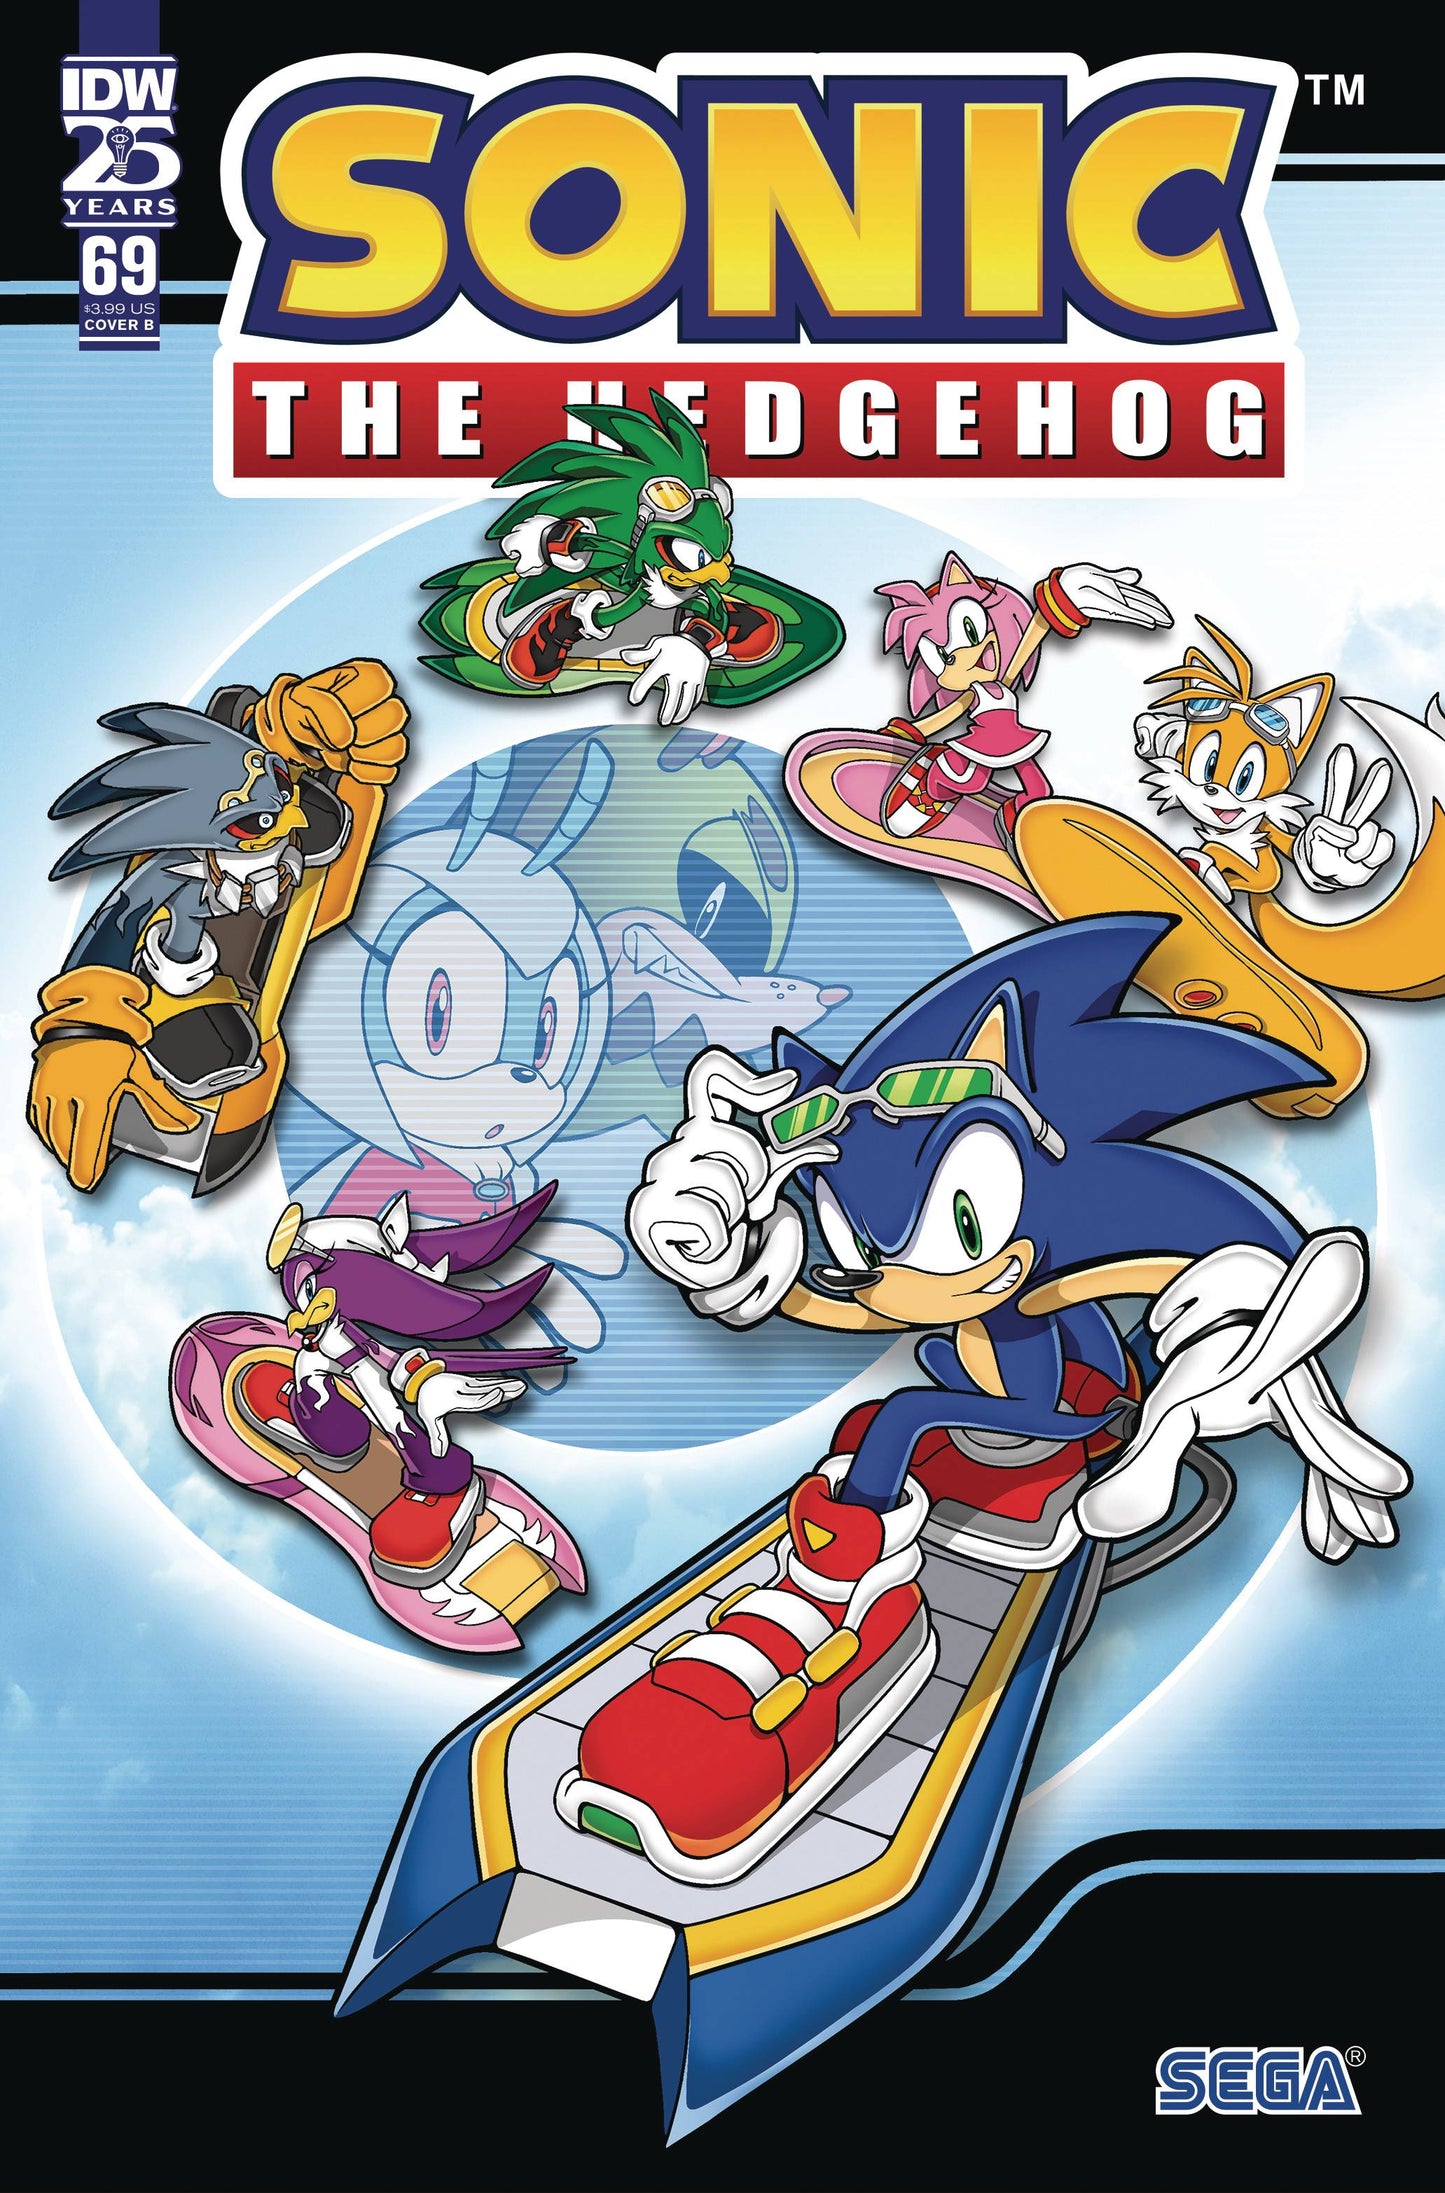 SONIC THE HEDGEHOG #69 CVR B CURRY (29 May Release)